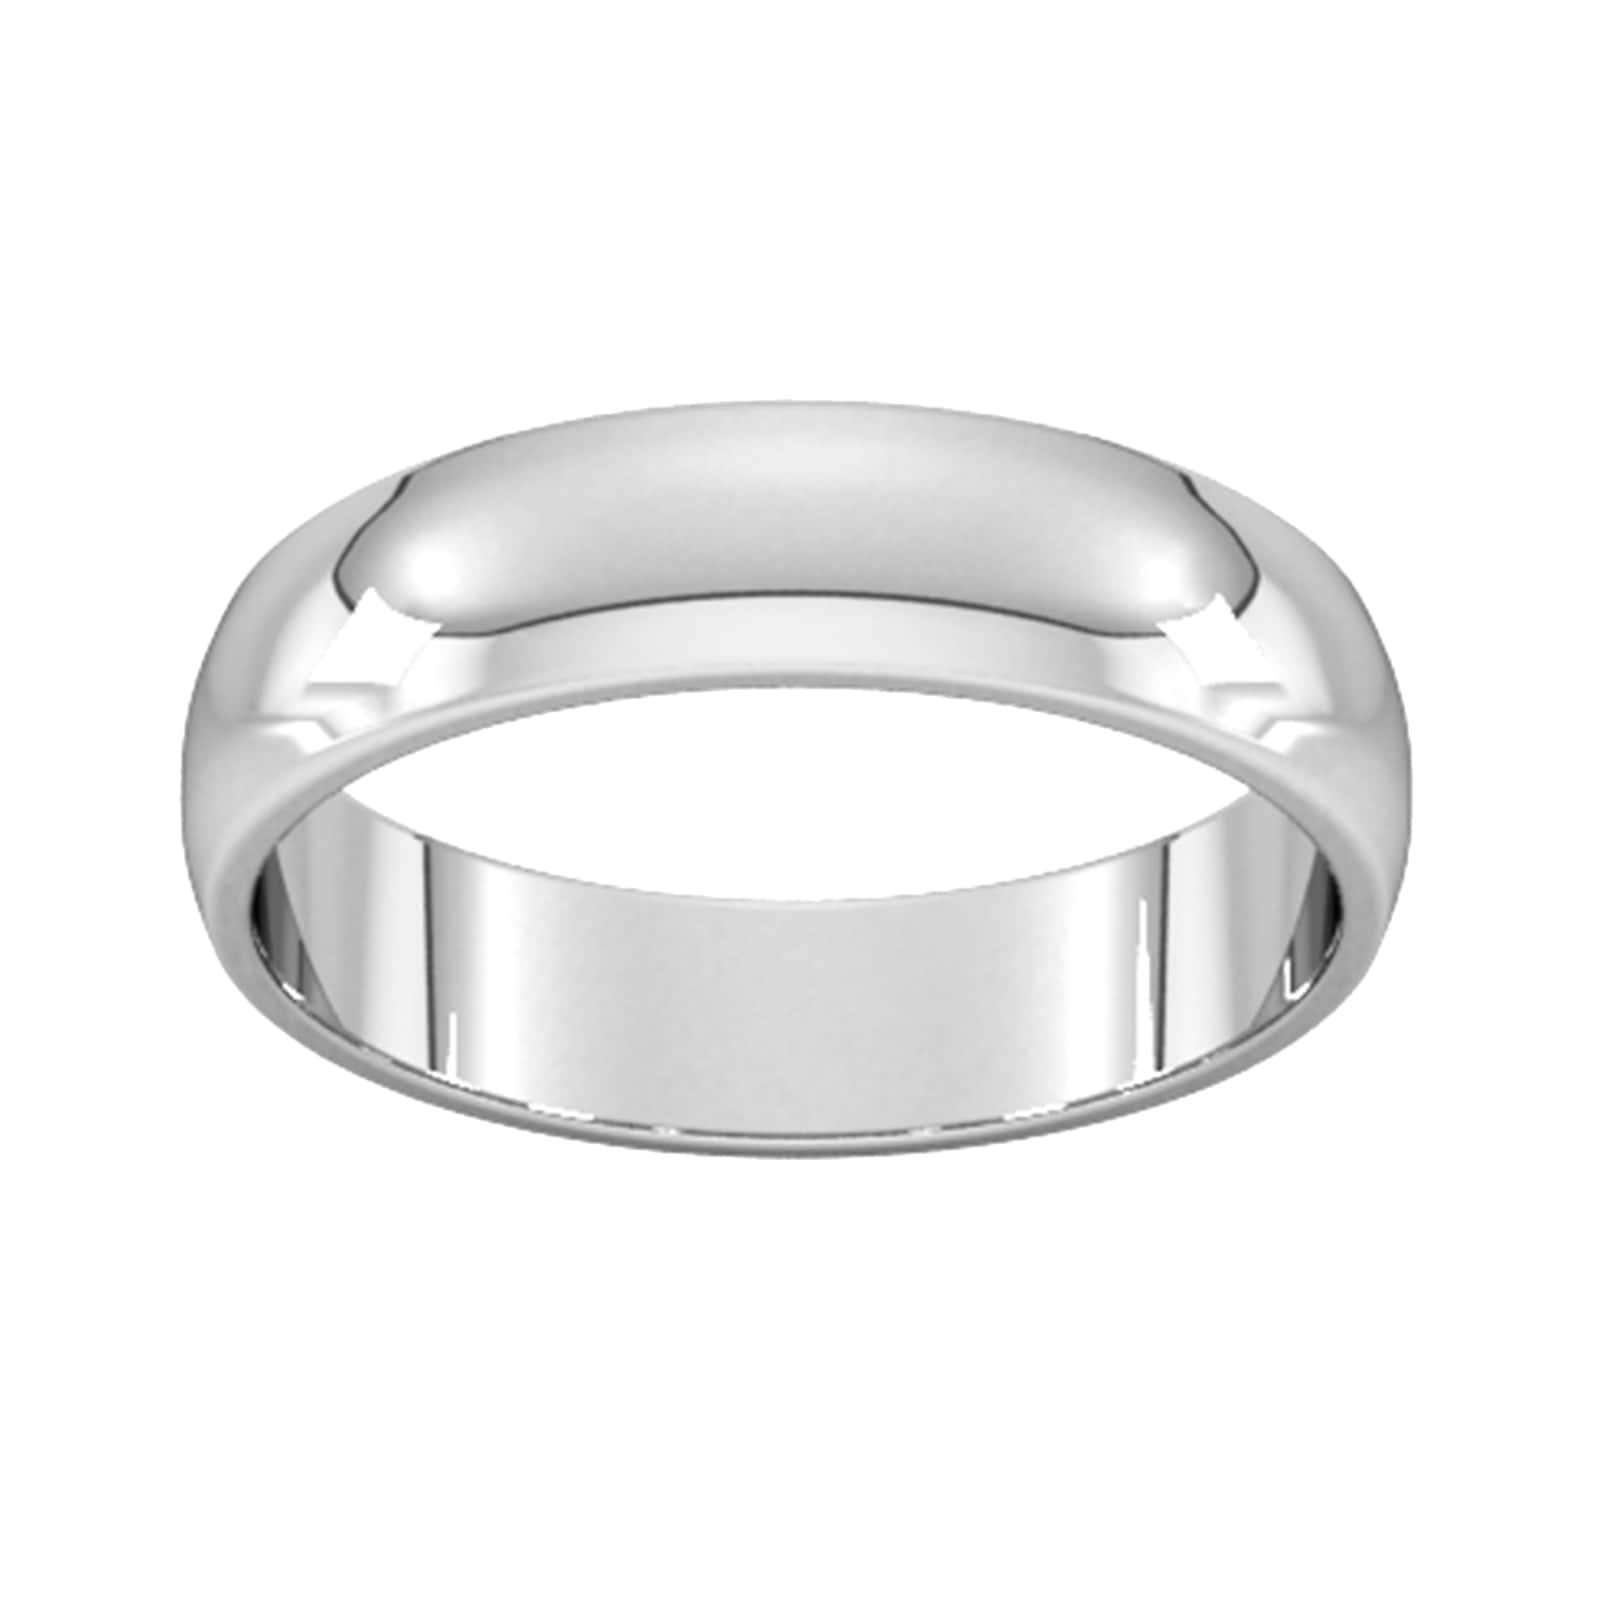 5mm D Shape Standard Wedding Ring In 18 Carat White Gold - Ring Size Q